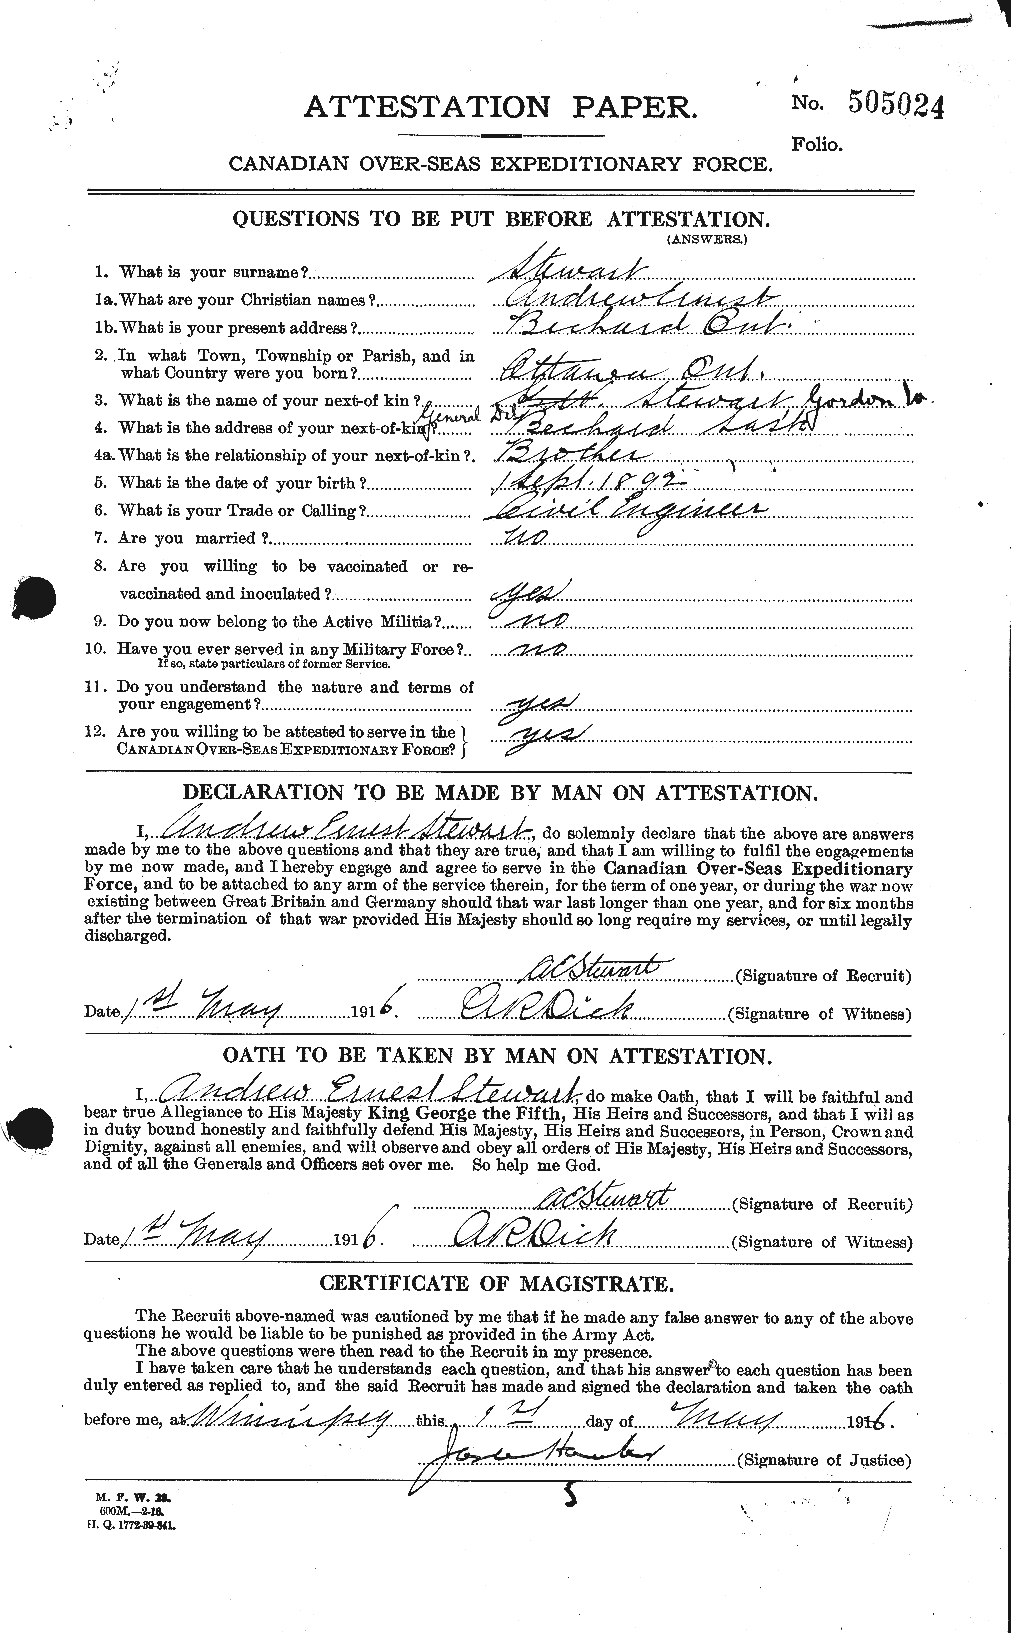 Personnel Records of the First World War - CEF 118519a